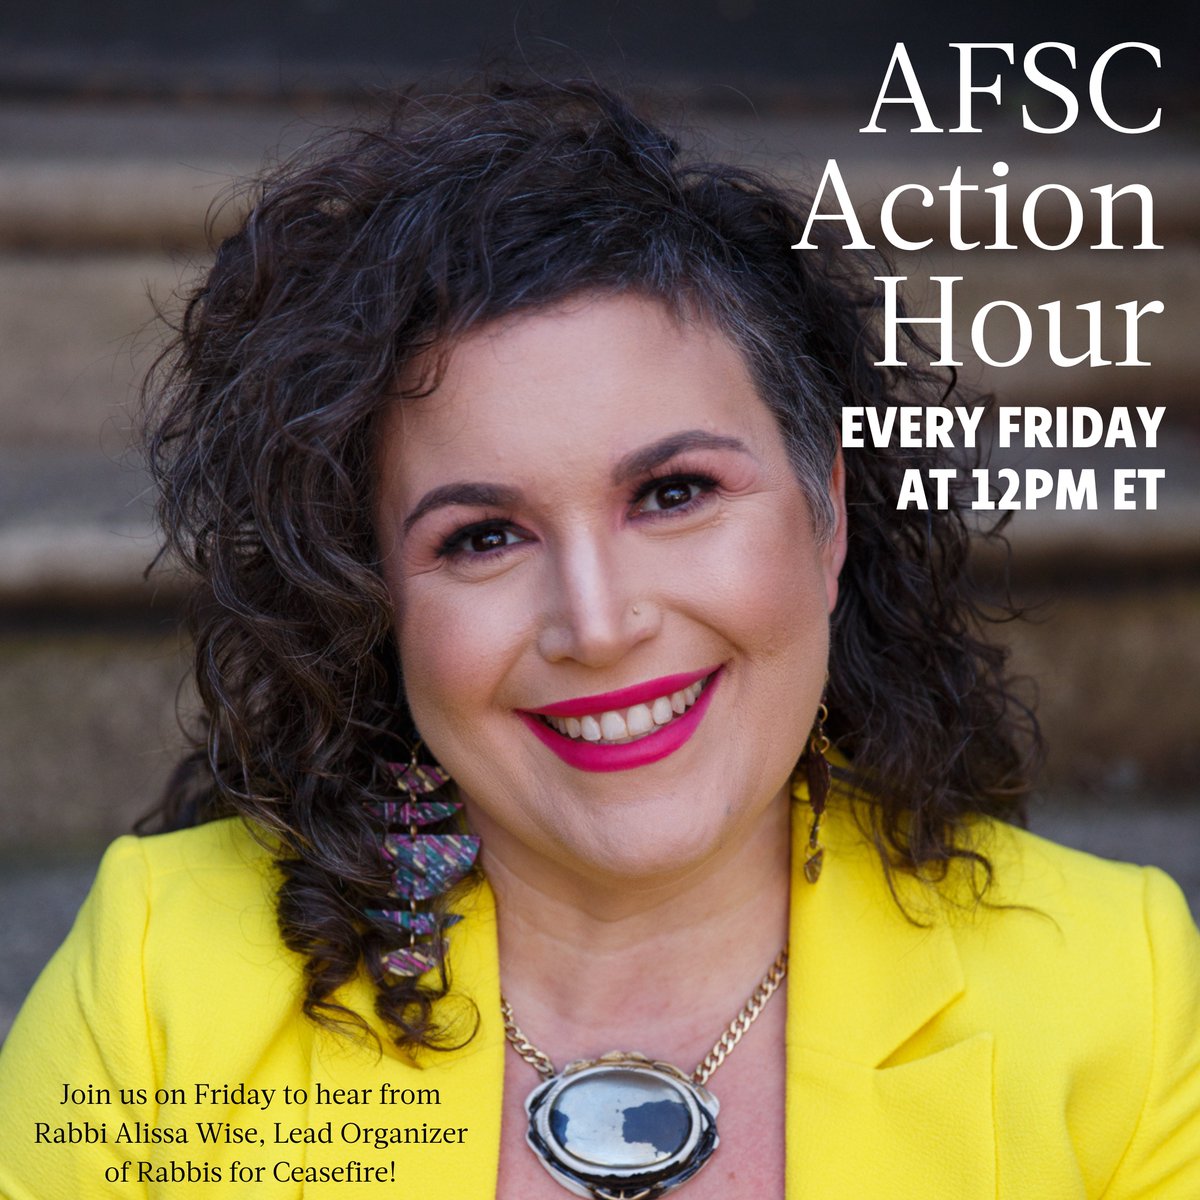 Join us Fri., 3/22 @ 12pm ET for AFSC Action Hour. For #WomensHistoryMonth we're ft. inspiring women organizing and advocating for a #CeasefireNOW. This week, we'll be joined by @AlissaShira, lead organizer of @rodfeishalom #RabbisForCeasefire

Sign up: afsc.org/actionhour